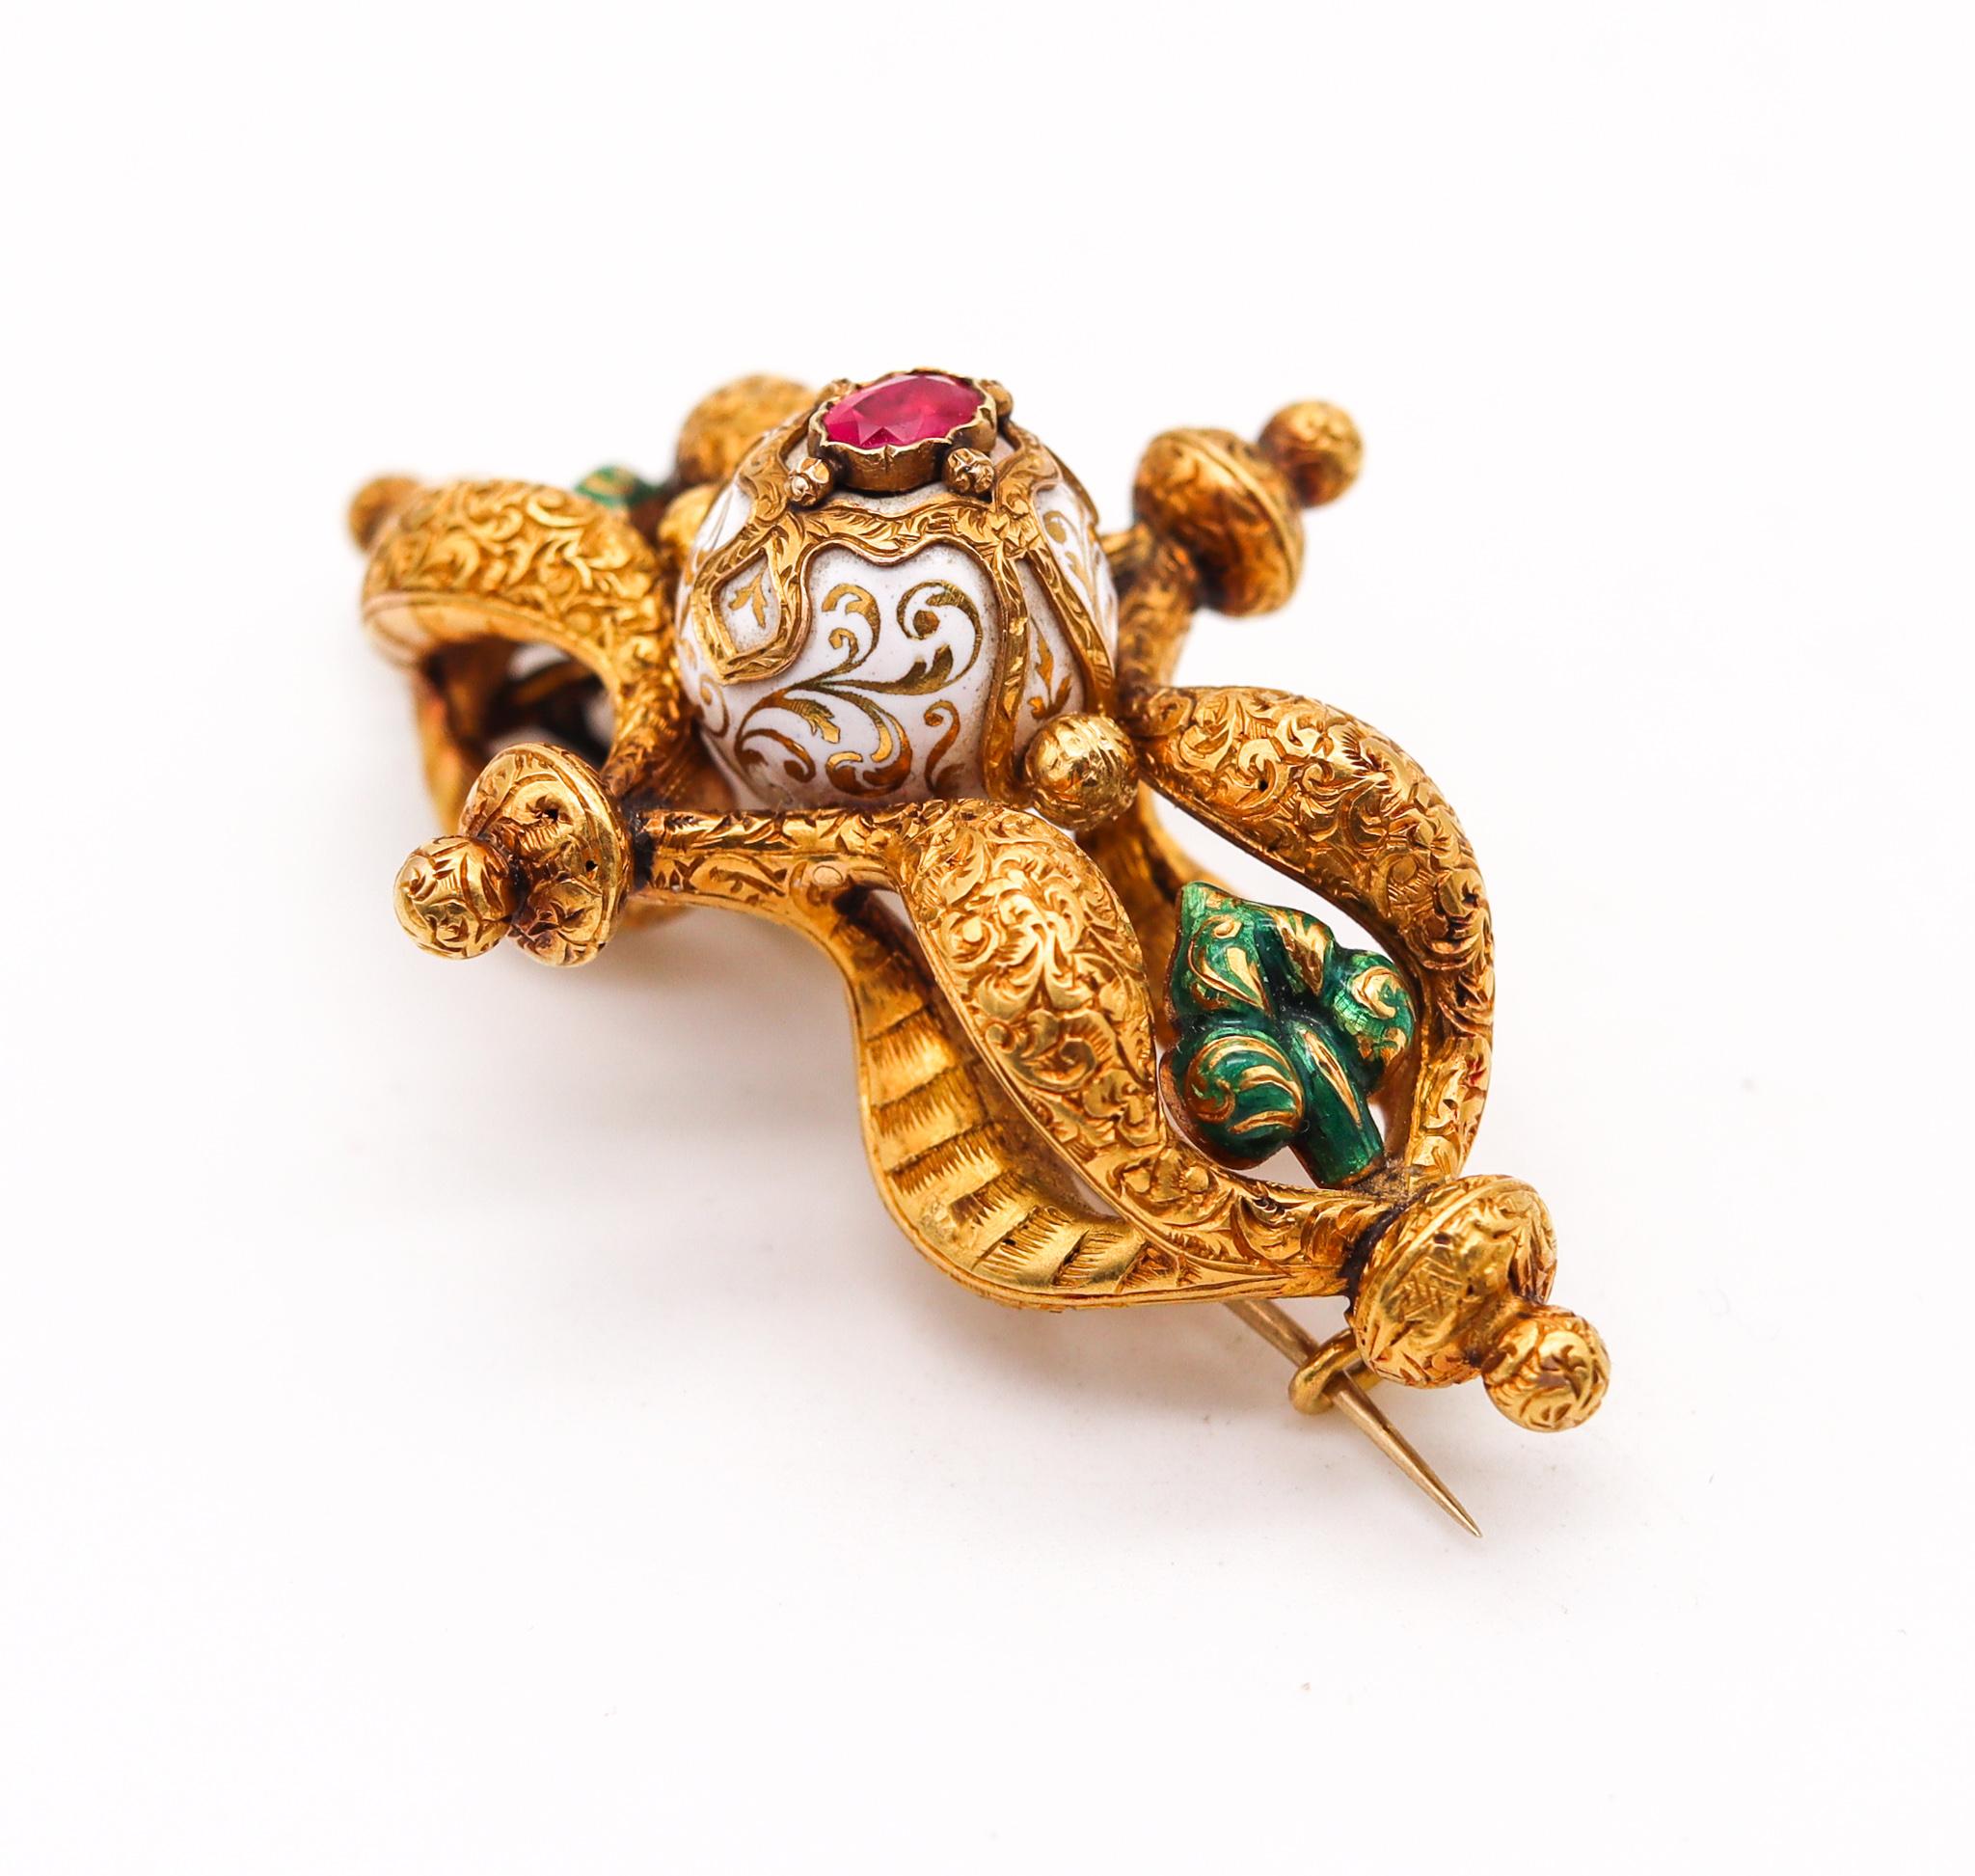 French Etruscan-Merovingian revival brooch.

Fantastic piece with gorgeous eye appeal, created in France back in the 1850. It was crafted in three dimensions with textured chiseled floriated patterns, in solid yellow gold of 18 karats. The style of